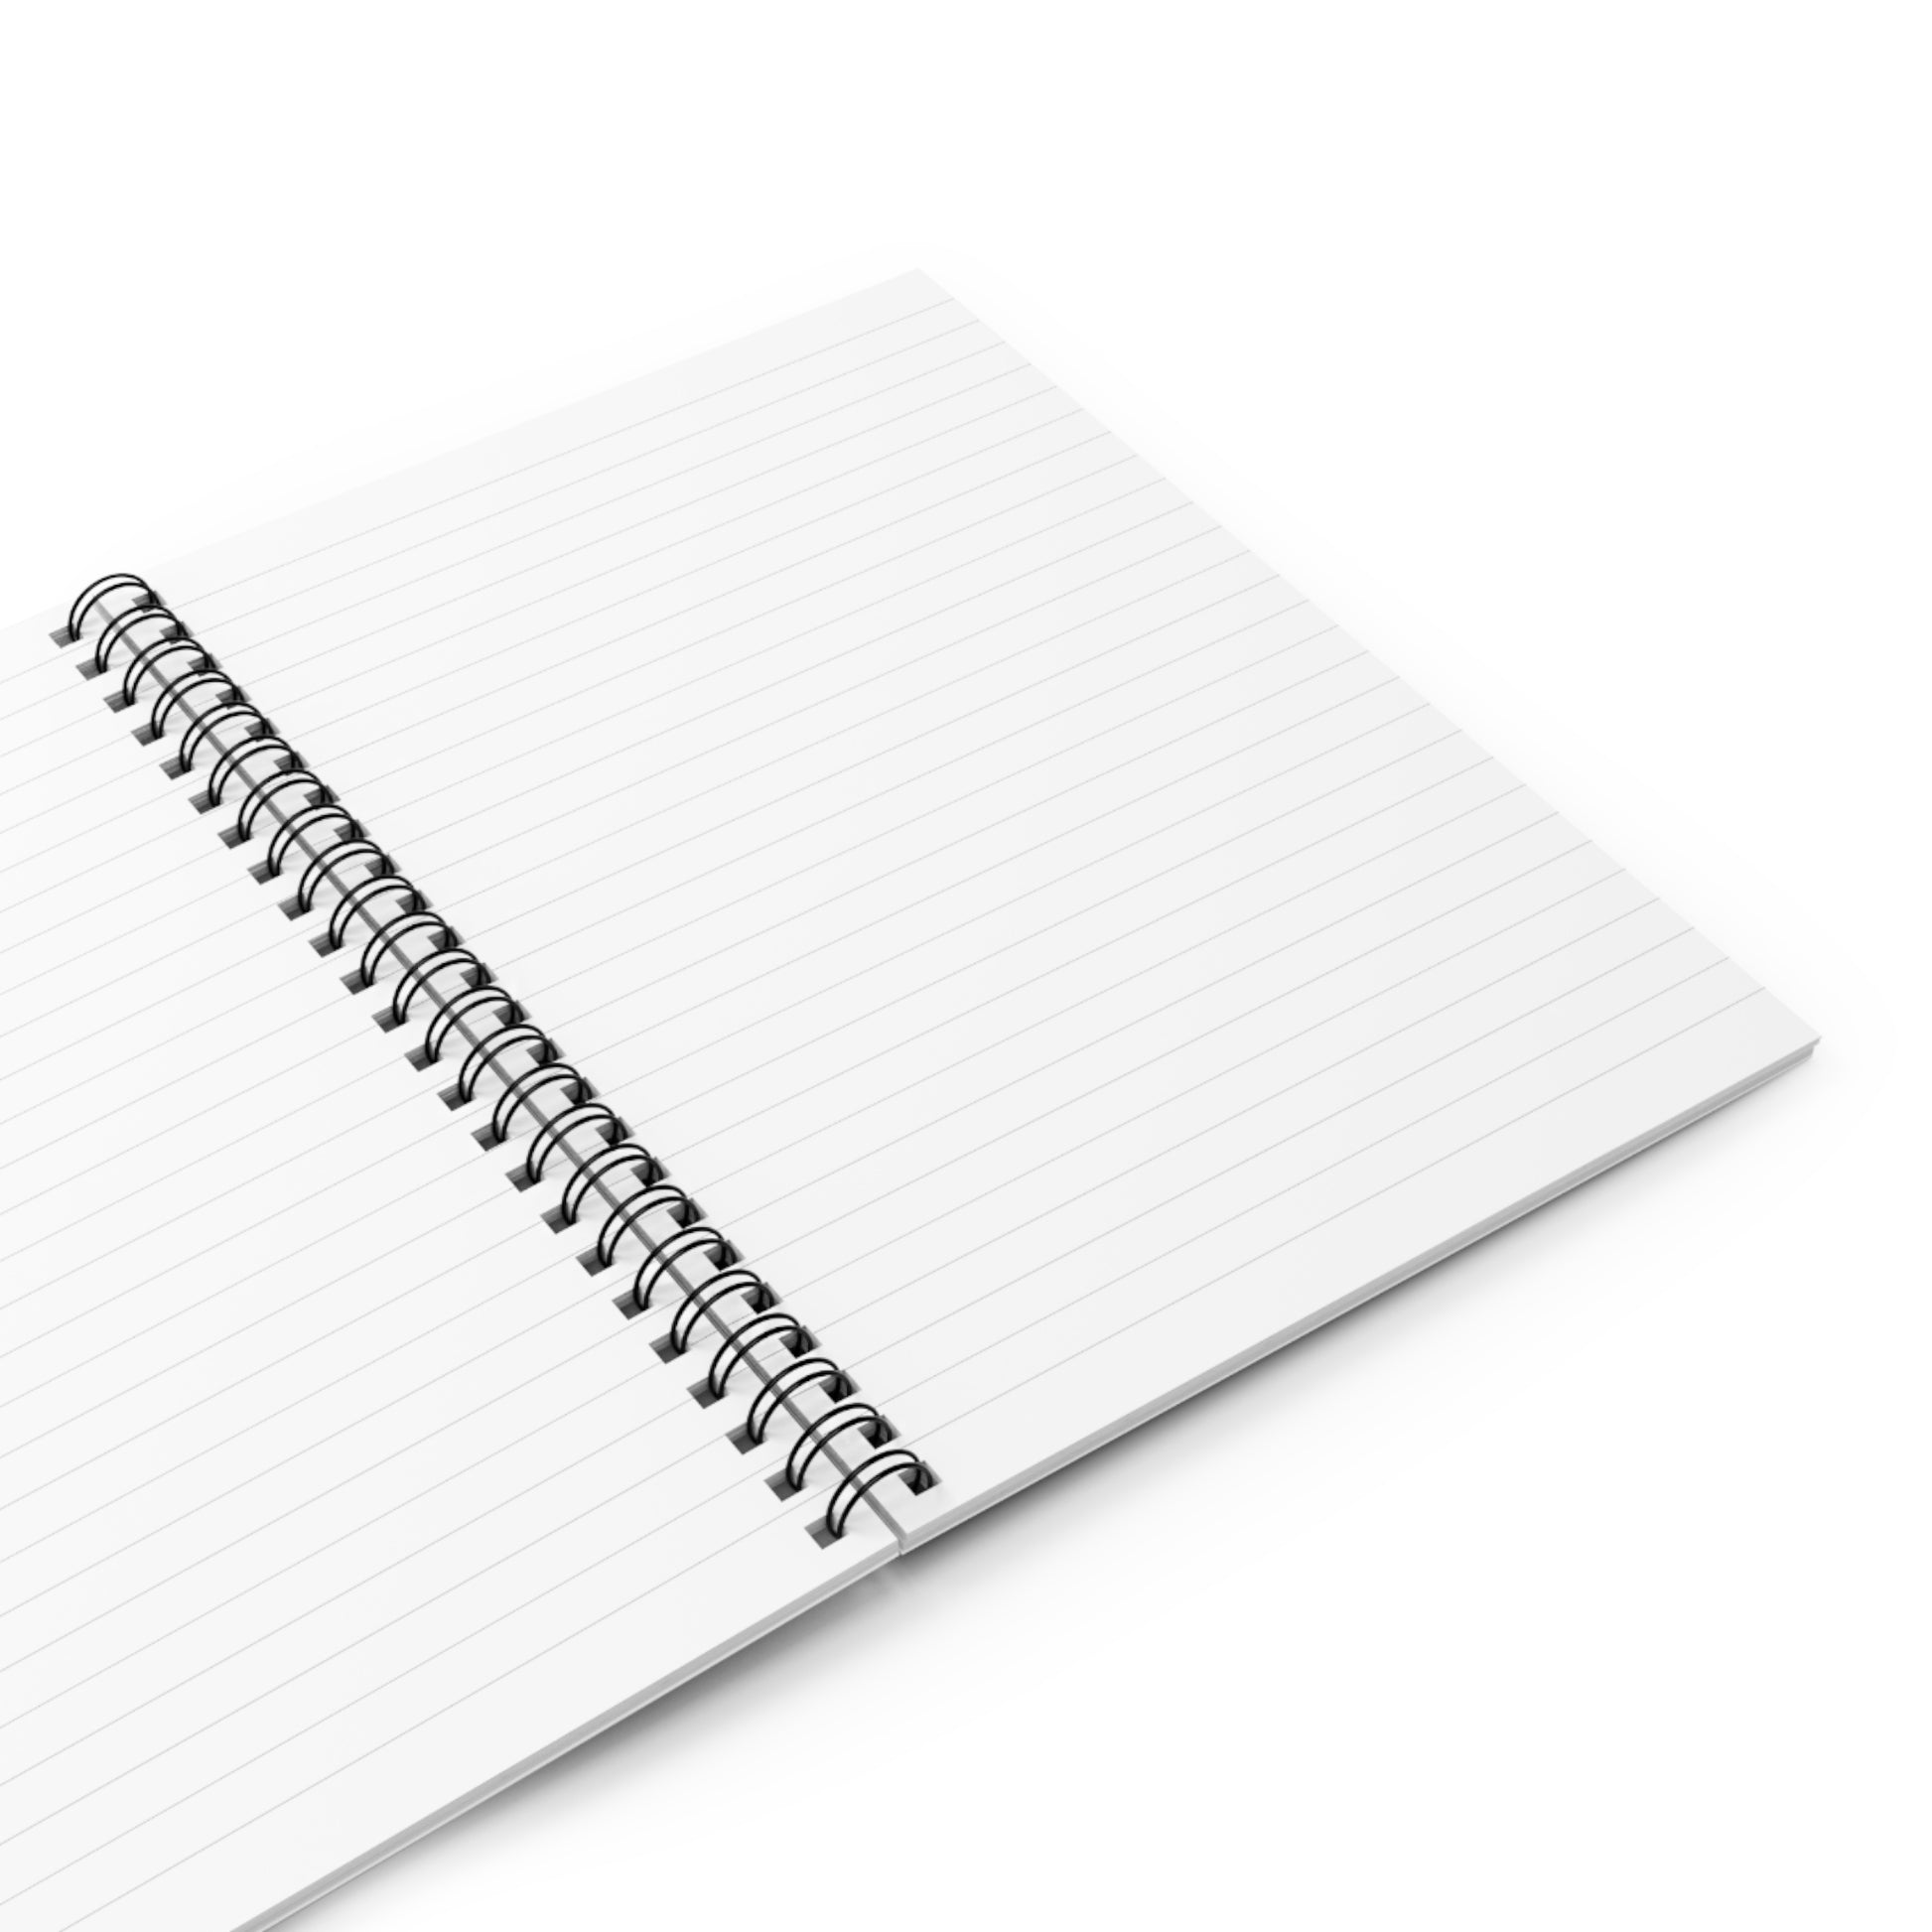 An open Printify spiral notebook with blank lined pages, perfect as a guest book for wedding receptions.